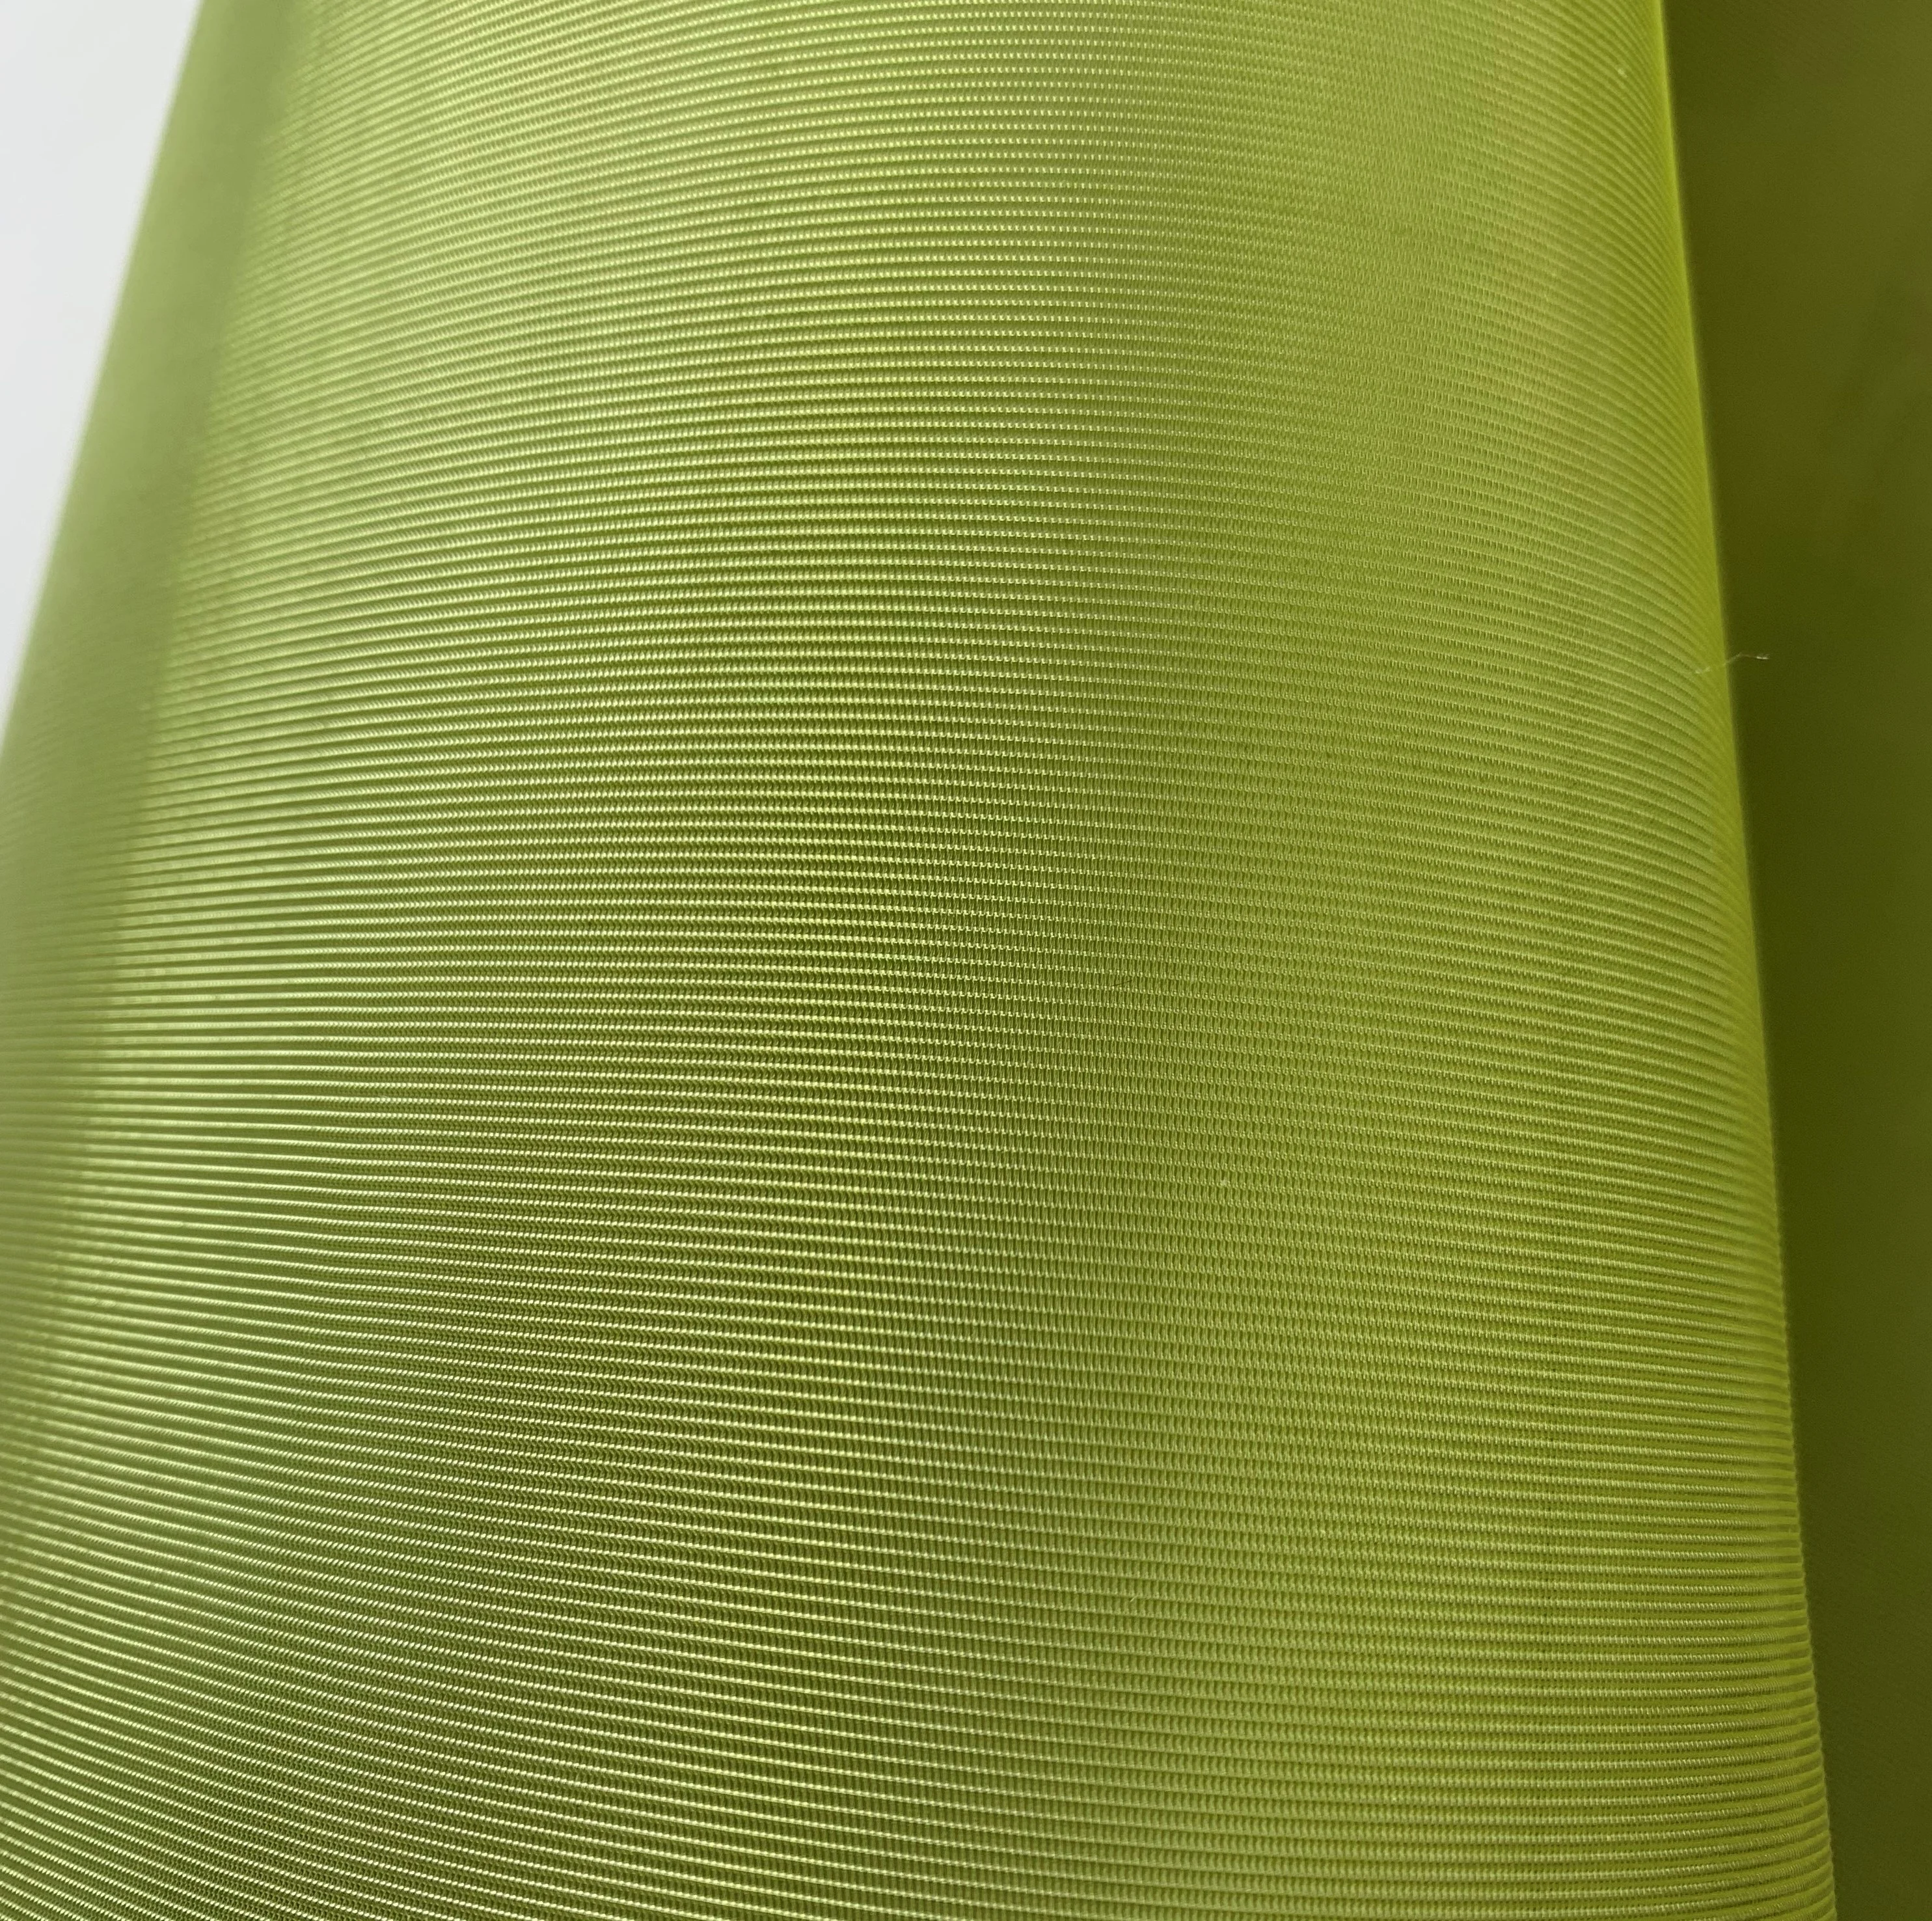 
New design Nylon Breathable Mesh Fabric for shoes clothing 